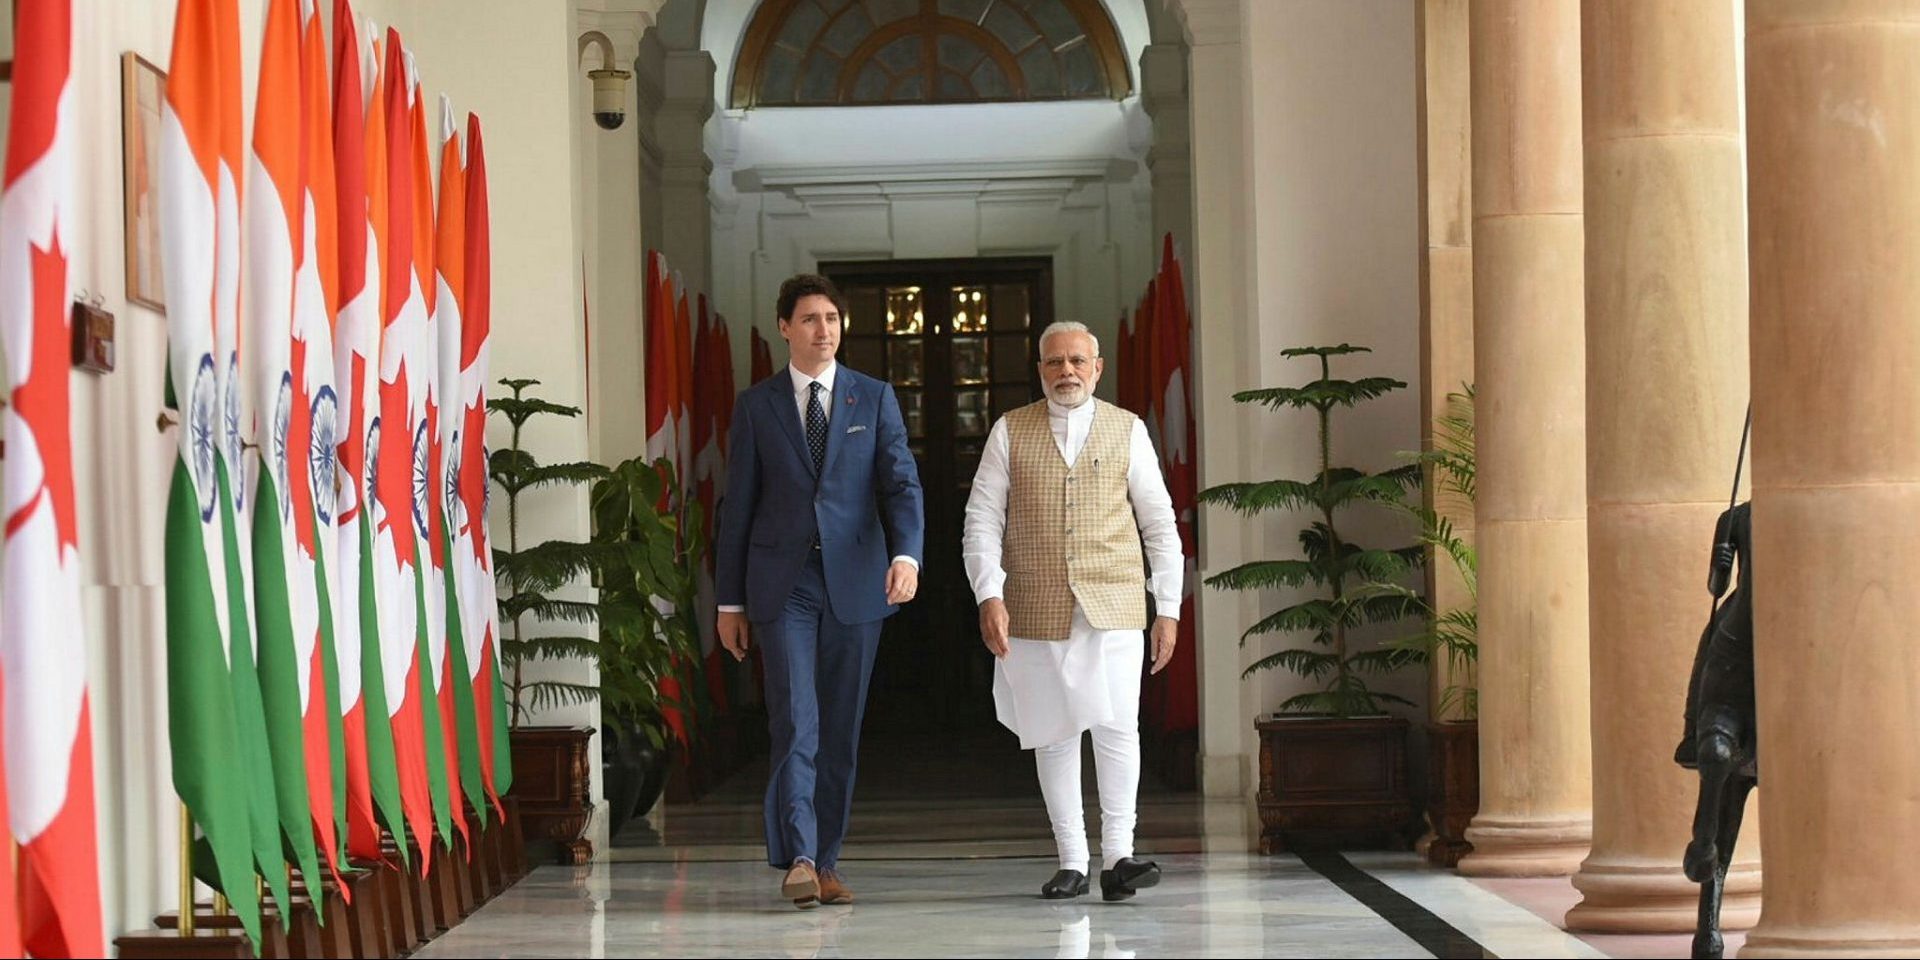 Prime Minister Justin Trudeau and Indian Prime Minister Narendra Modi meet on Feb. 23 during Mr. Trudeau's trip to India. Photograph courtesy of Narendra Modi's Twitter account